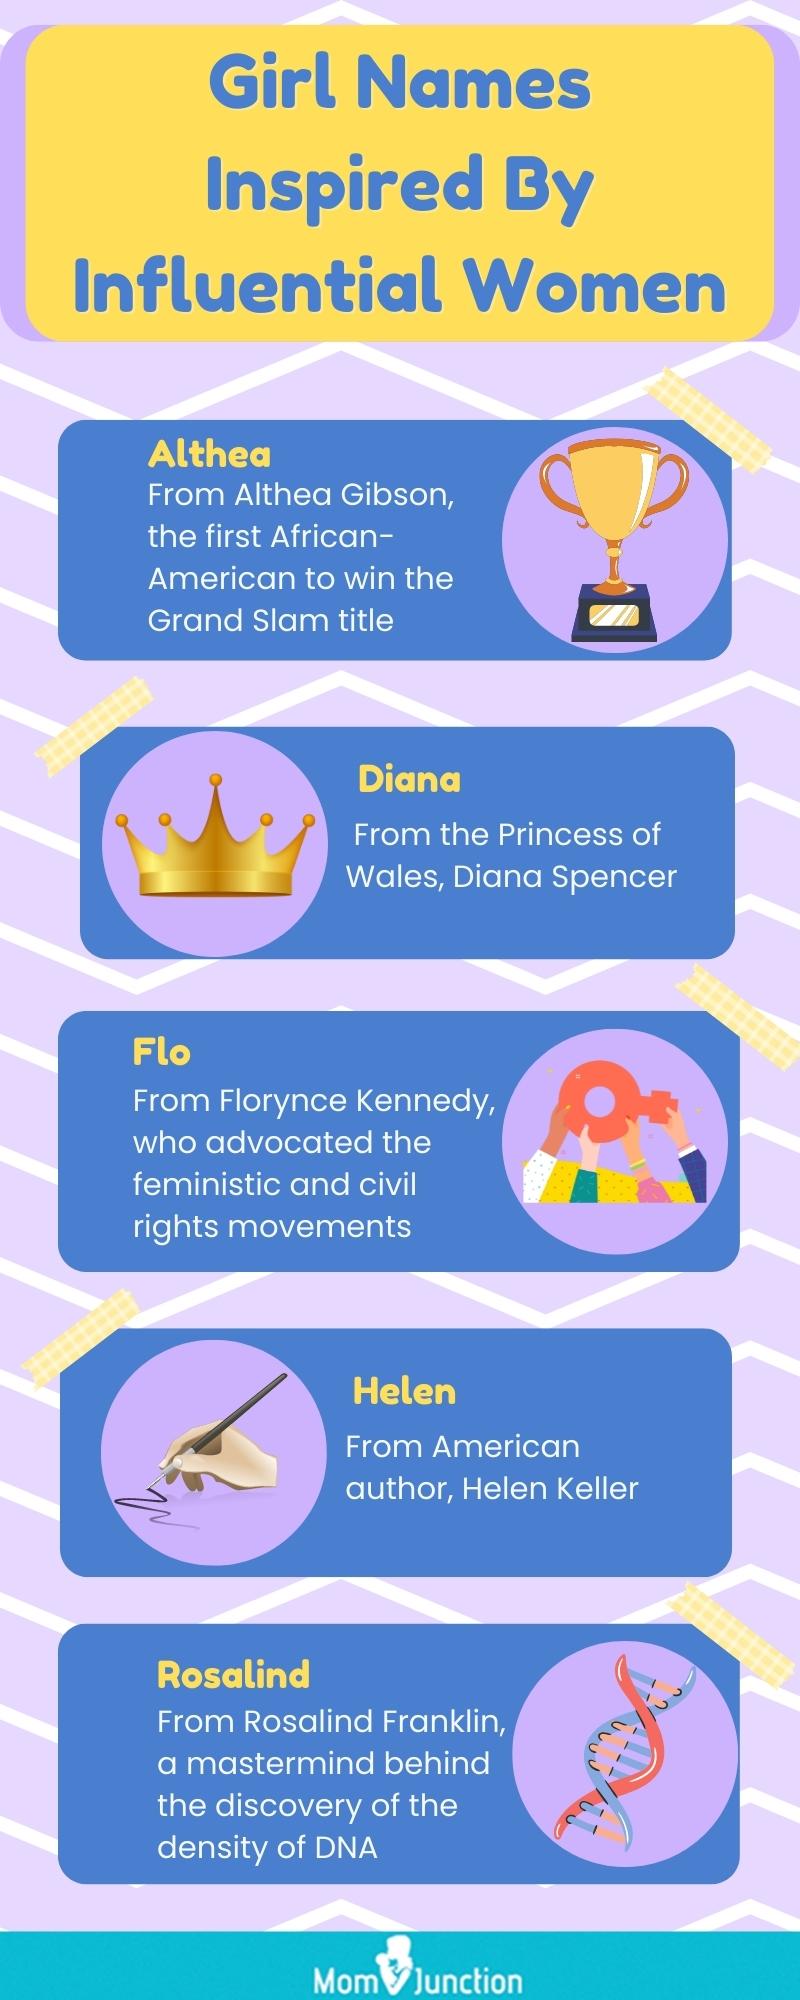 girl names inspired by influential women (infographic)